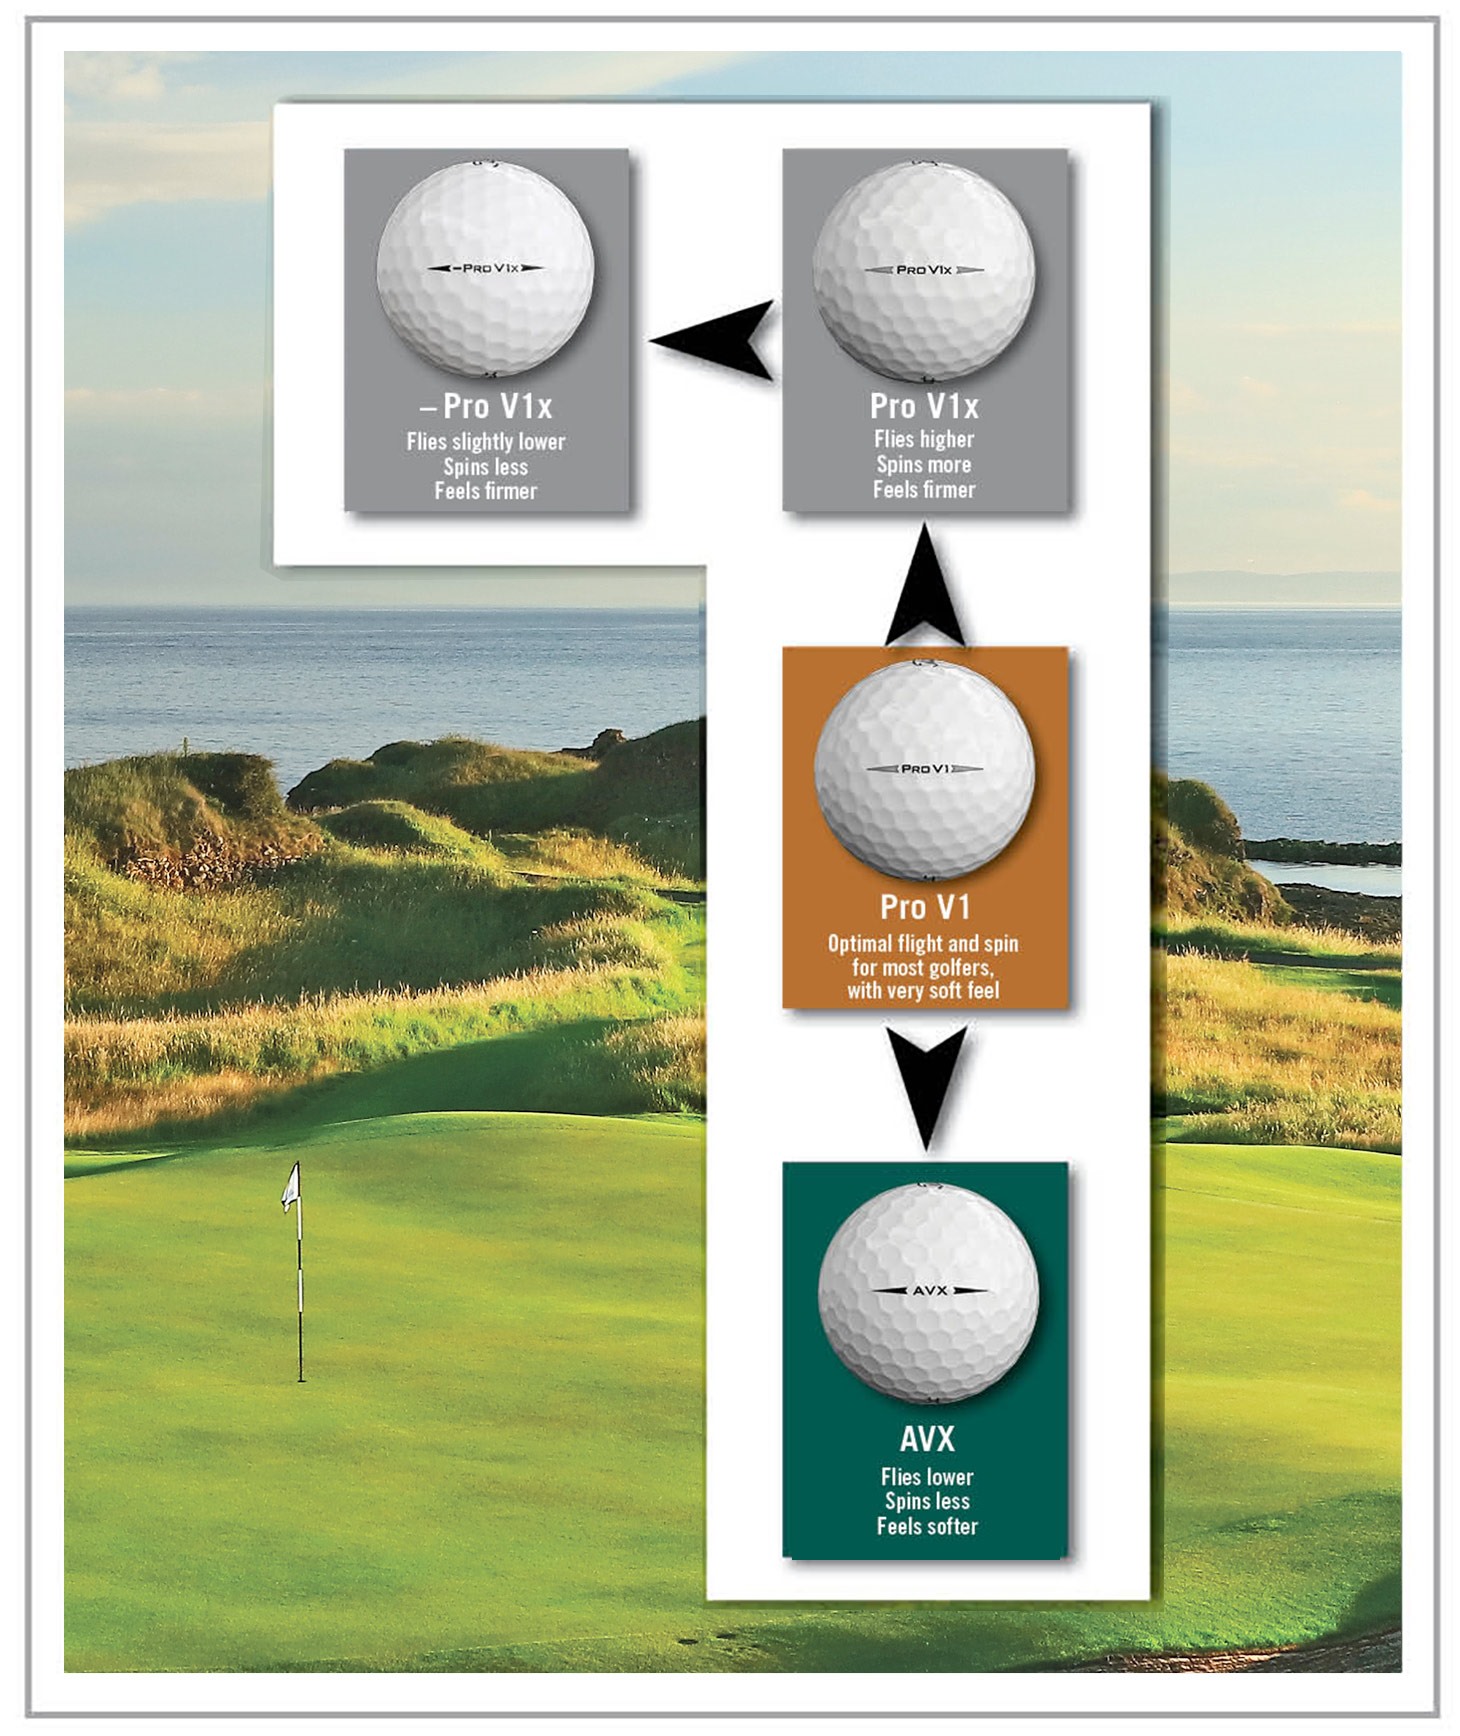 Chart comparing the flight, feel and spin of Titleist Pro V1, Pro V1x, AVX and Pro V1x Left Dash golf balls